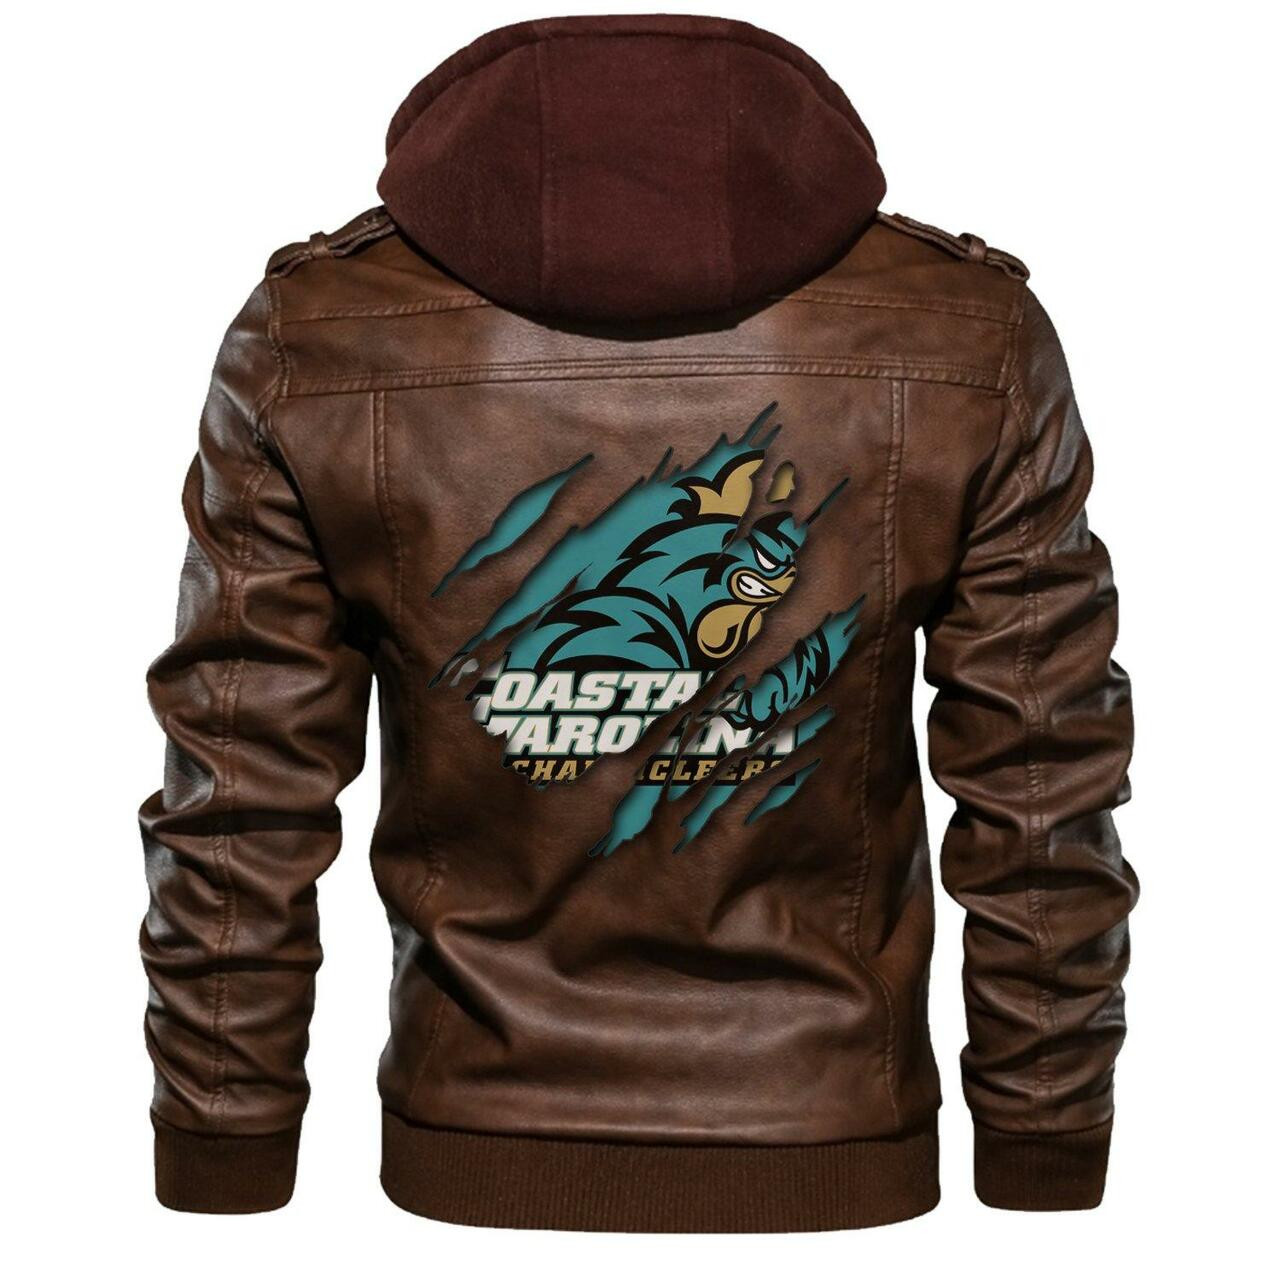 Don't wait another minute, Get Hot Leather Jacket today 24